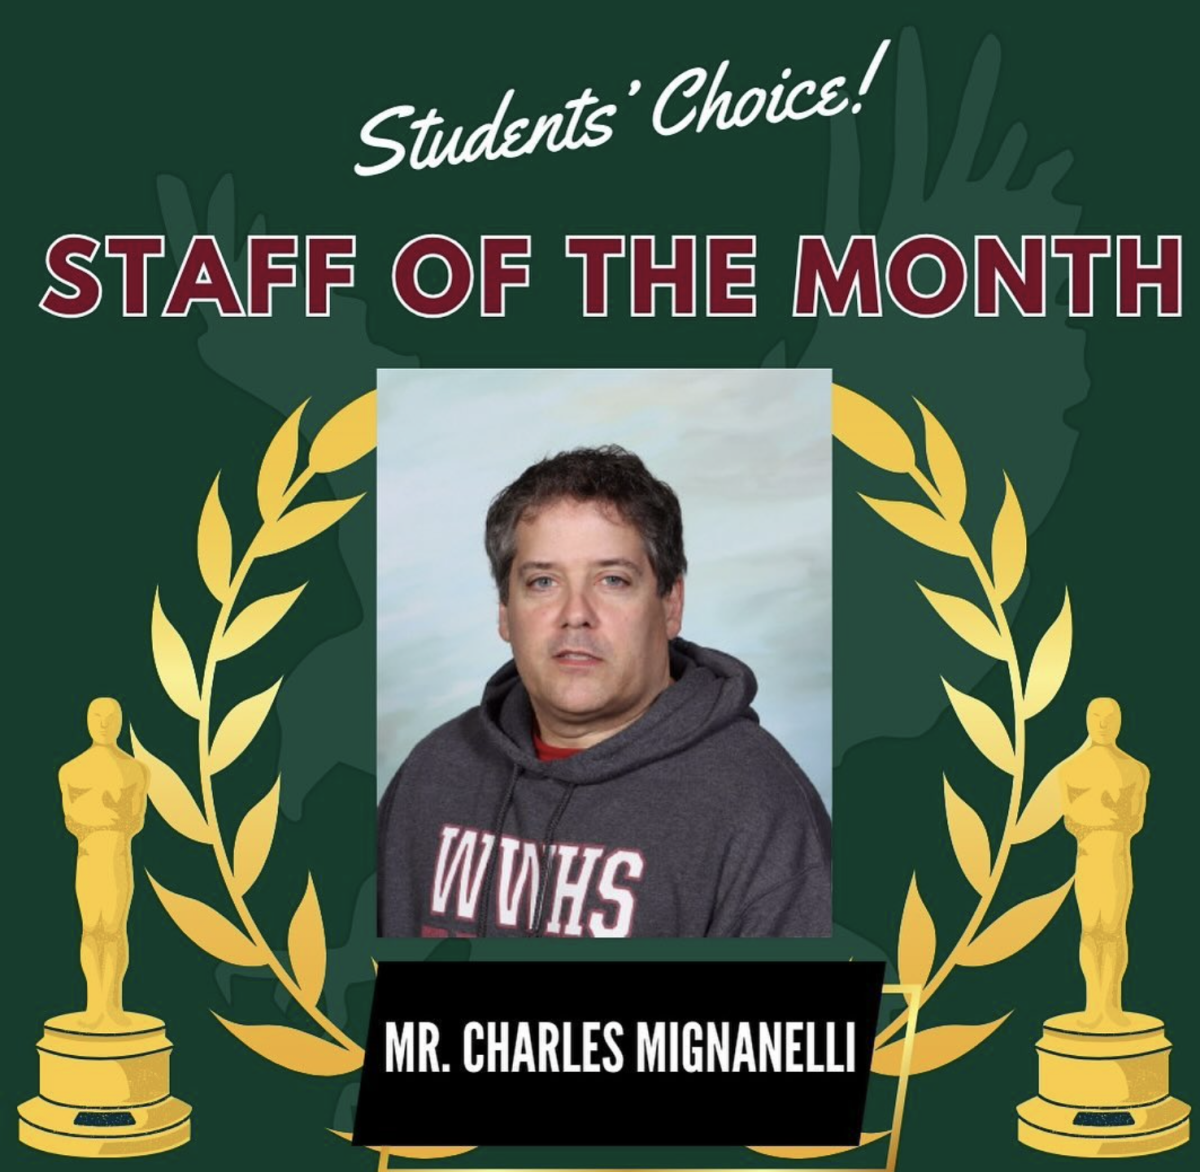 Every month students of Woodrow Wilson High School vote for faculty to be nominated as, Students Choice Staff of the Month.